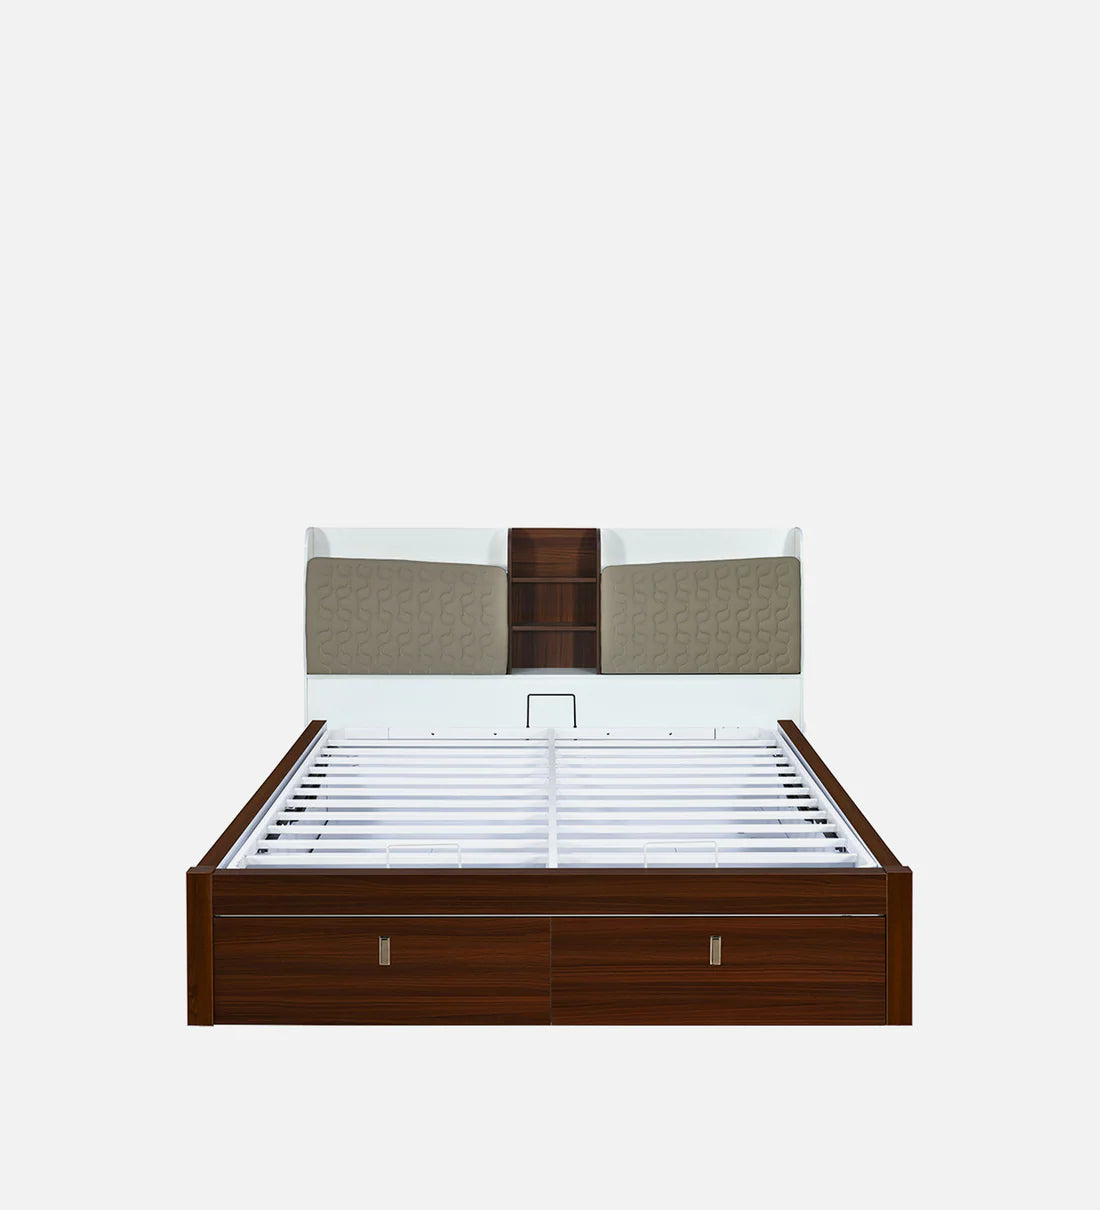 Memo Premier King Bed In Walnut Finish With Hydrualic Storage